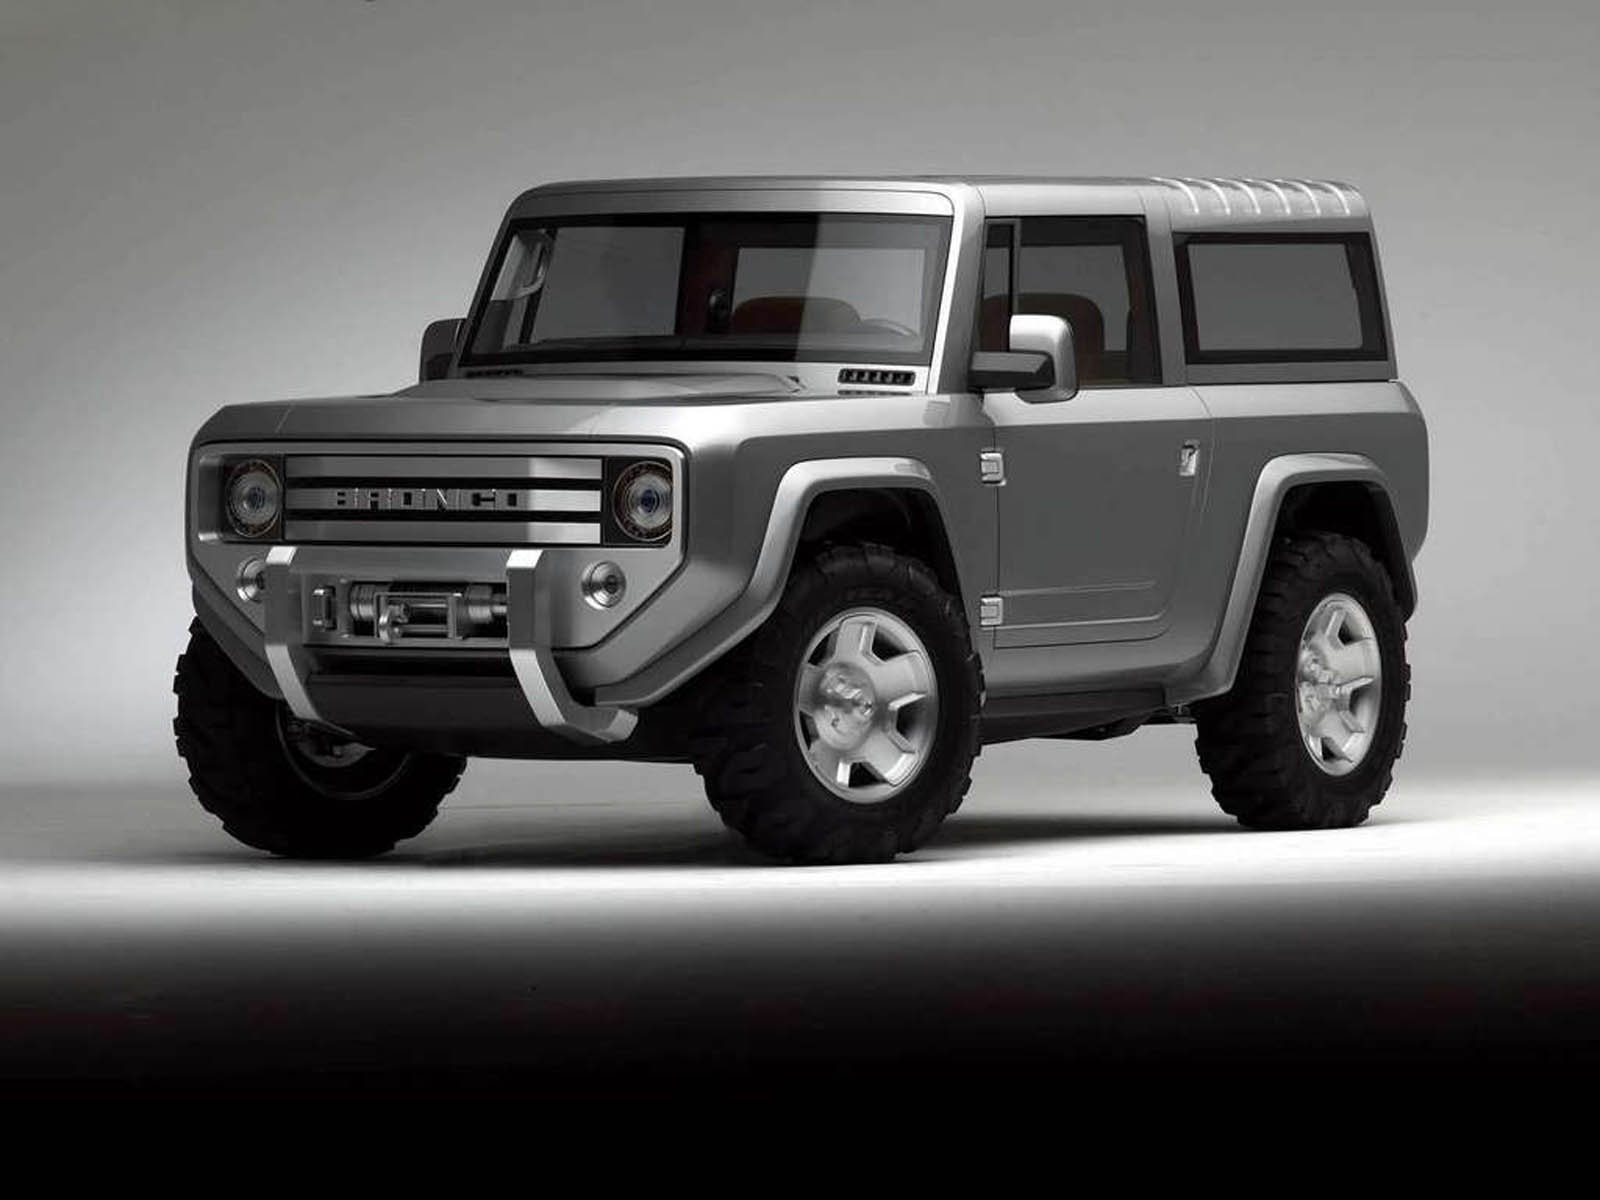 Tag Ford Bronco Concept Car Wallpaper Background Photos Image